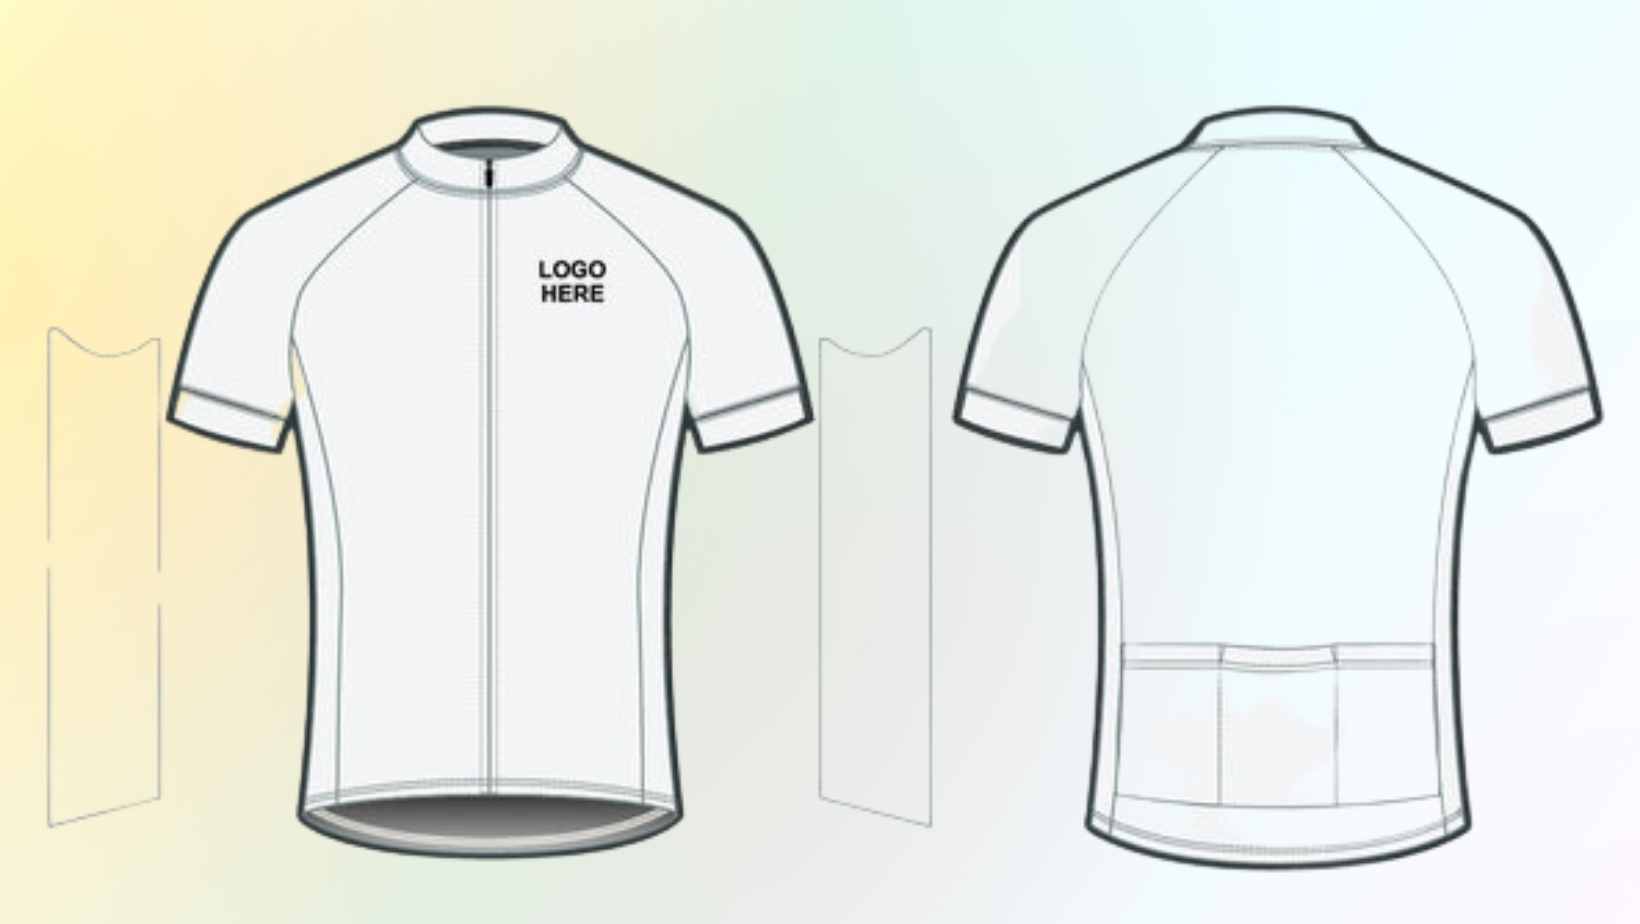 Which Pattern Is More Suitable for Cycling Jersey?